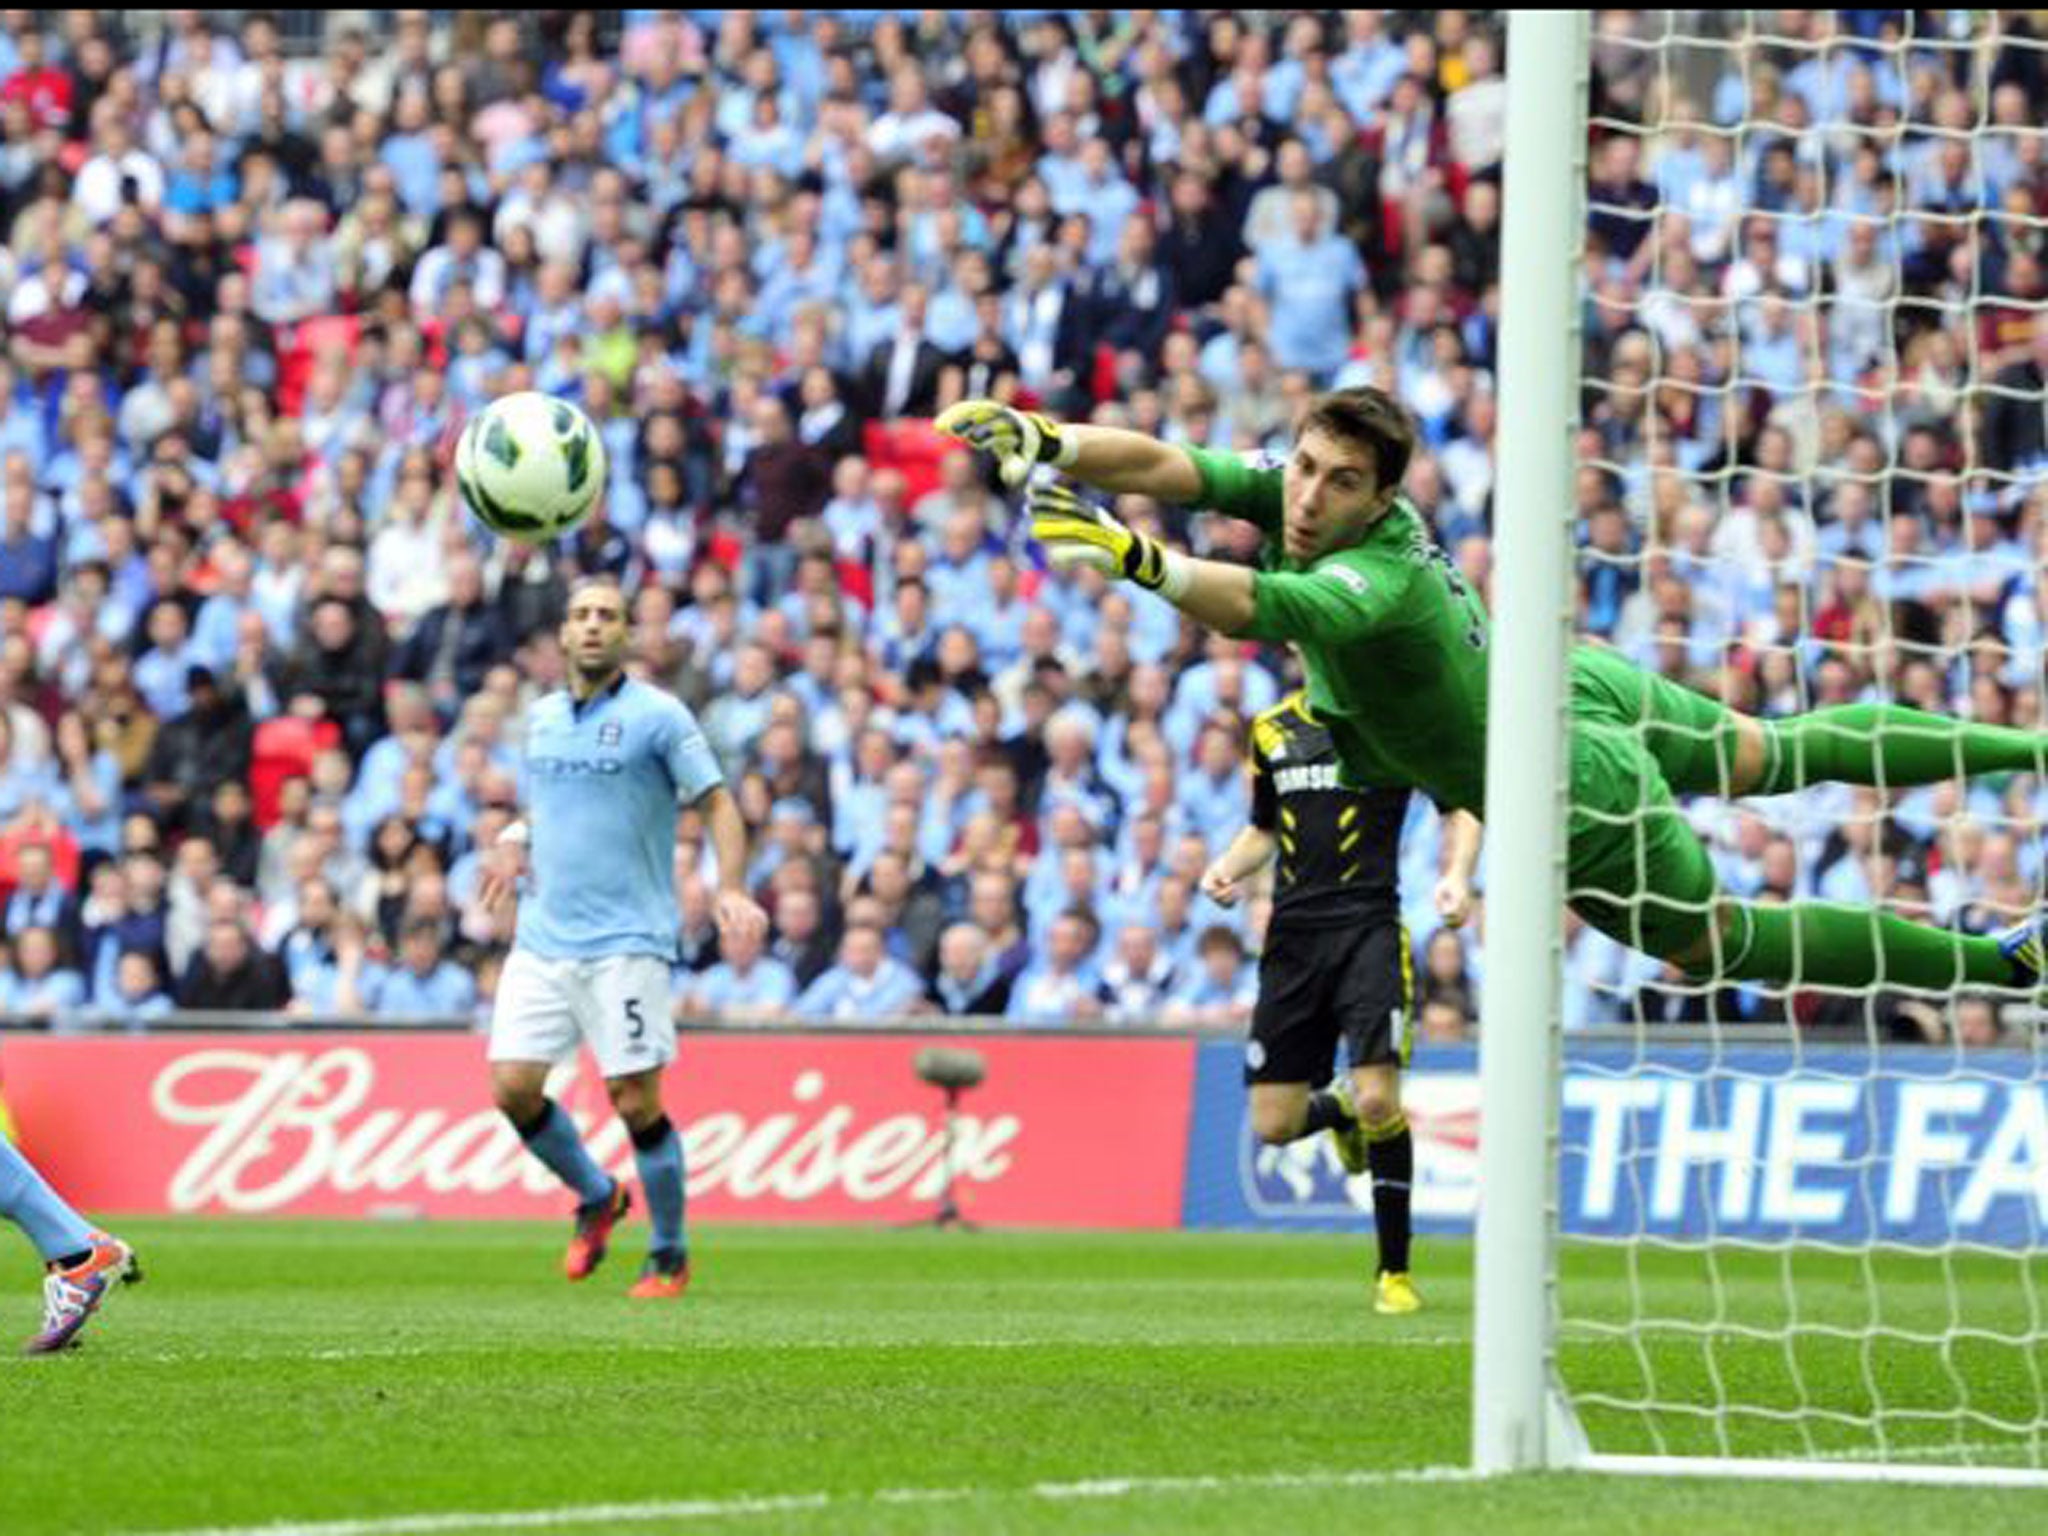 Manchester City’s Costel Pantilimon watches a shot sail wide at Wembley